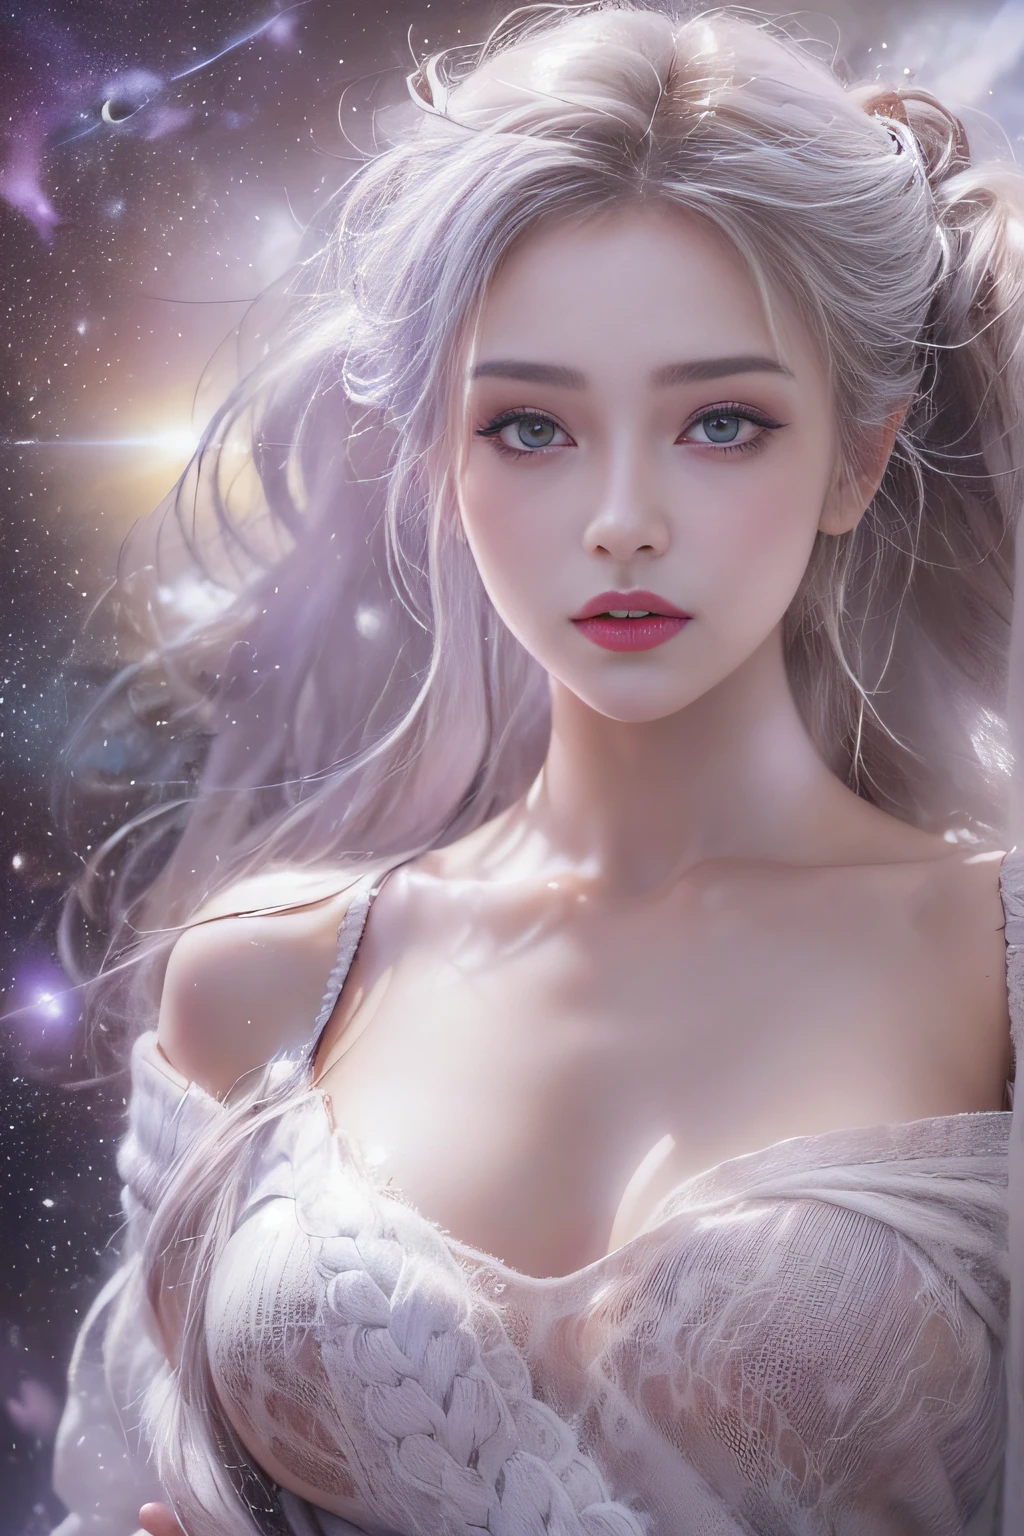 ((tmasterpiece:1.4)、(top-quality:1.4)、(reallistic:1.7))、By Luis Royo（By Luis Royo）Surreal portrait of a beautiful girl、Super beautiful girl、((1girl in:1.4))、Shiny natural skin texture、Authors：By Luis Royo（By Luis Royo）、age19、(Two arms:1.4、Two legs:1.4)、(perfect anatomia:1.4)、(Perfect female body:1.4)、Portrait photo of a girl、Close-up photos、Full body shooting、((masutepiece:1.4), (of the highest quality:1.4), (Realistic:1.7), By Luis Royo, Beautiful Girl, Super beautiful girl, ((1girl in:1. 4), Shiny natural skin texture, Authors: By Luis Royo, 19 years old, (Perfect female body: 1.4), (Perfect female body: 1.) 4), Portrait photo of a girl, Close-up photos, （Full body photo）, Fantasy Art, Soft front light, Beautiful expression, Kawaii face, Beautiful breasts, Large Full Breasted: 1. 2, Beautiful buttocks, Fine eyes, Clear and eye-catching, beautiful and alluring, Beautiful eyes, thin waist, Raw photo, Red lips, ((White hair, Long hair)) , 1 Screen View, ),((Off-the-shoulder hand-knitted sweater))、((Black tight skirt)）、 (sexyposture), (the milky way in the sky),((T-back panties))、((Black garters and garter belts))、(A smile)、((Vaginal orchids)）、((erection)）